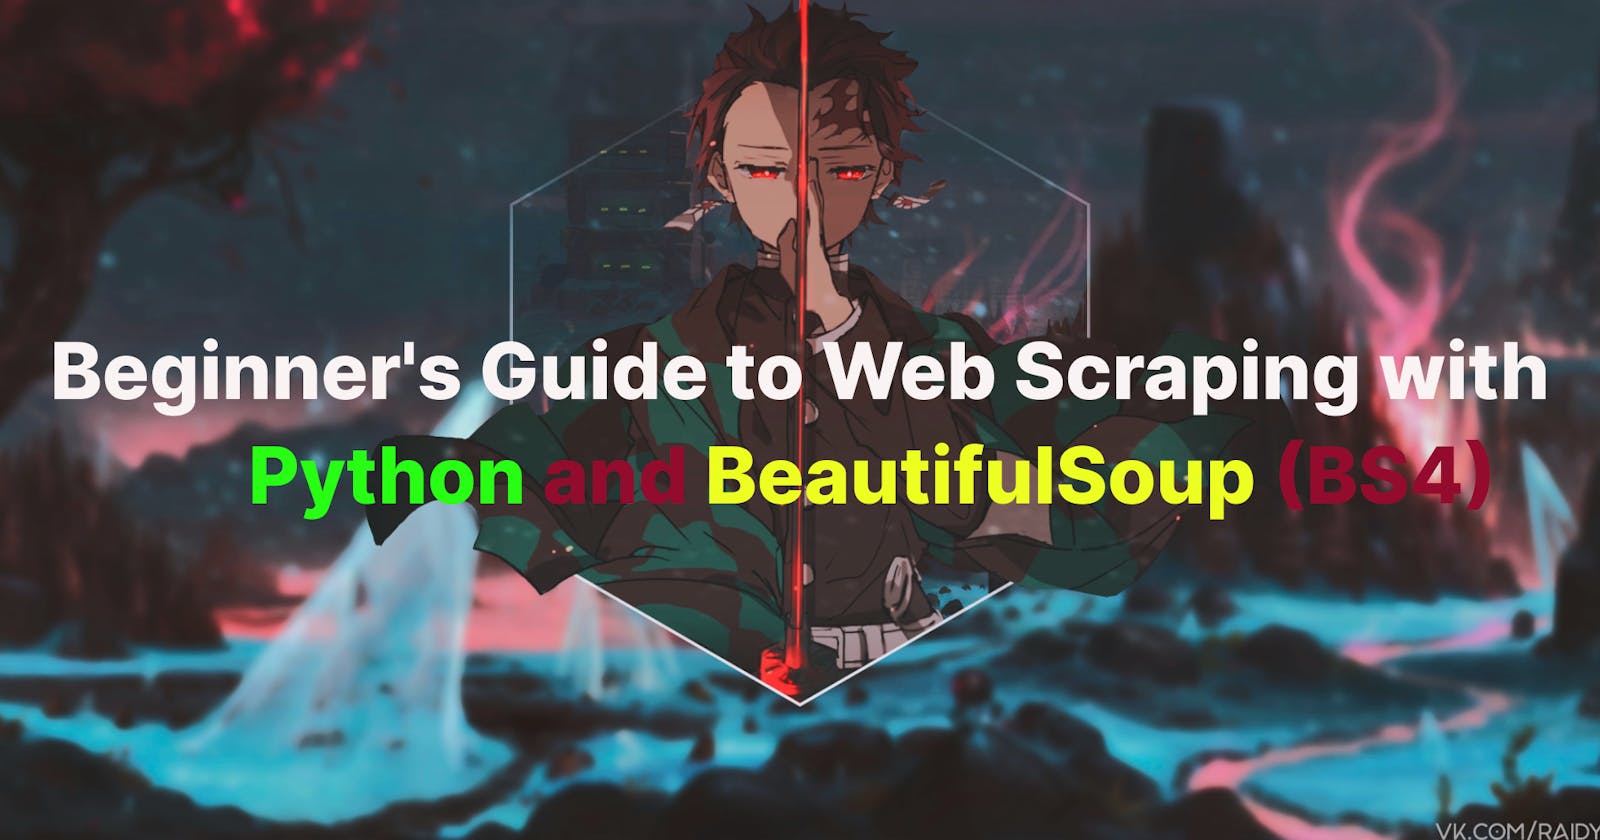 Mastering Web Scraping with Python and BeautifulSoup: A Beginner's Guide